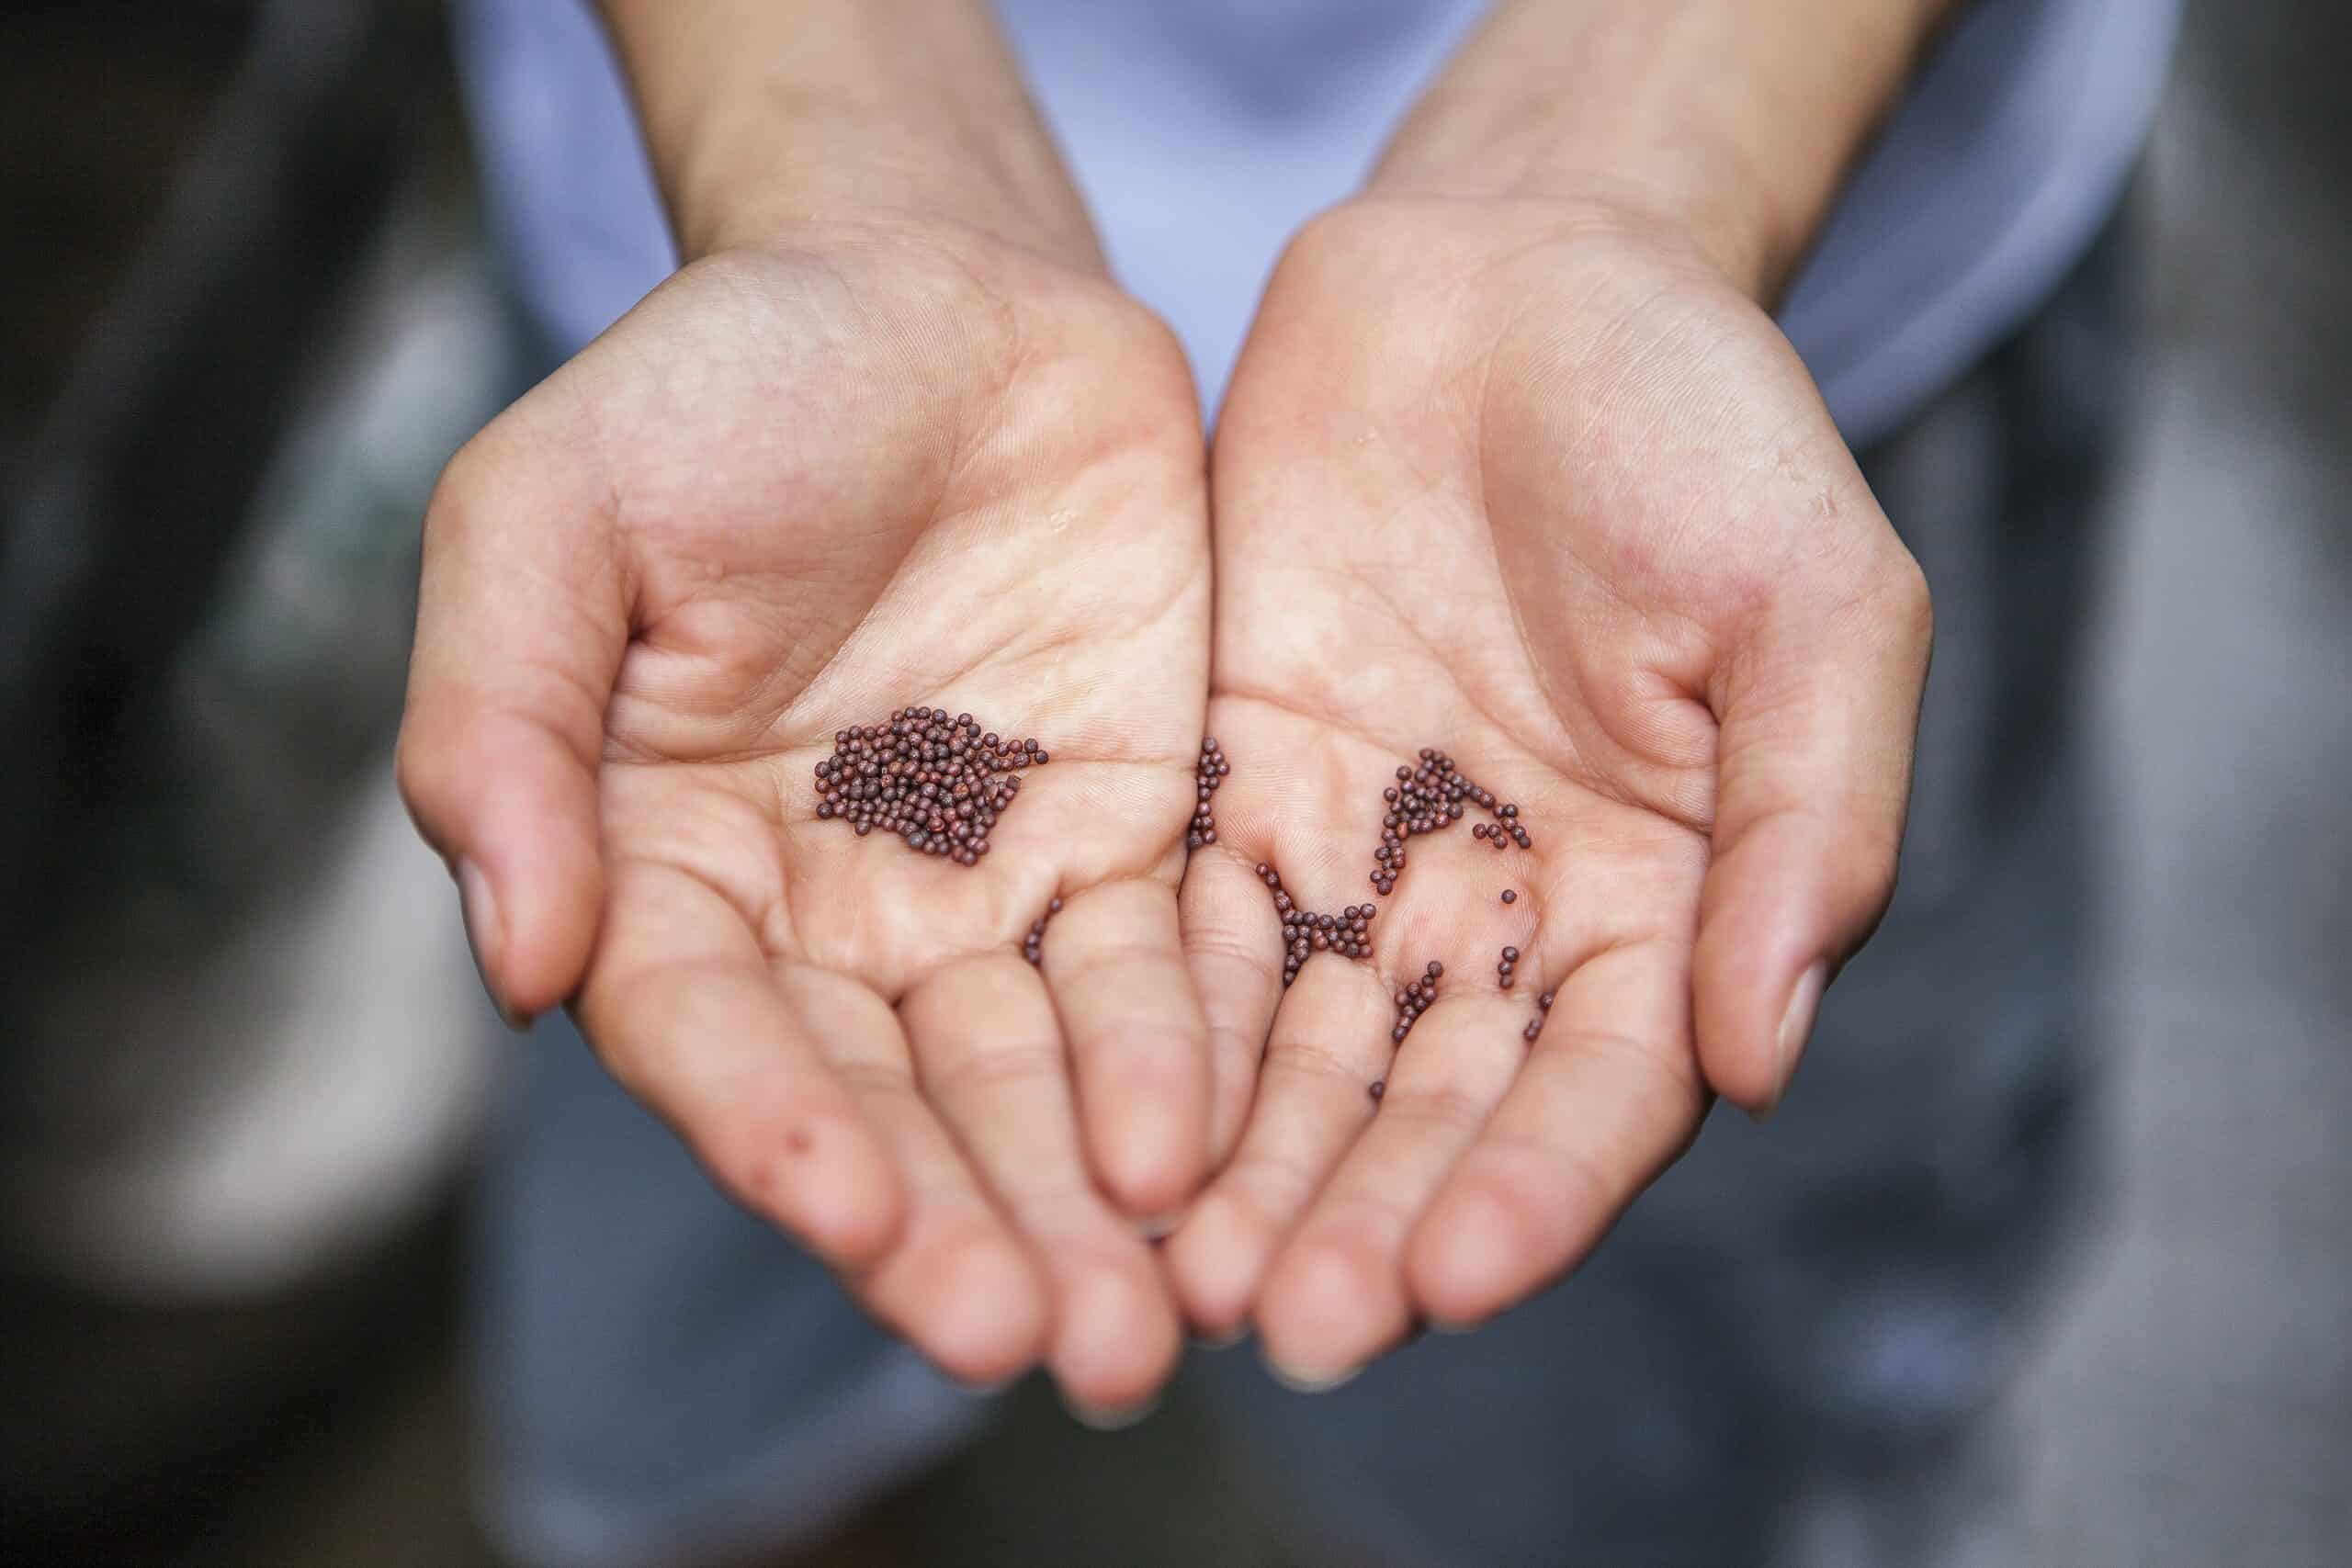 two hands holding small seeds